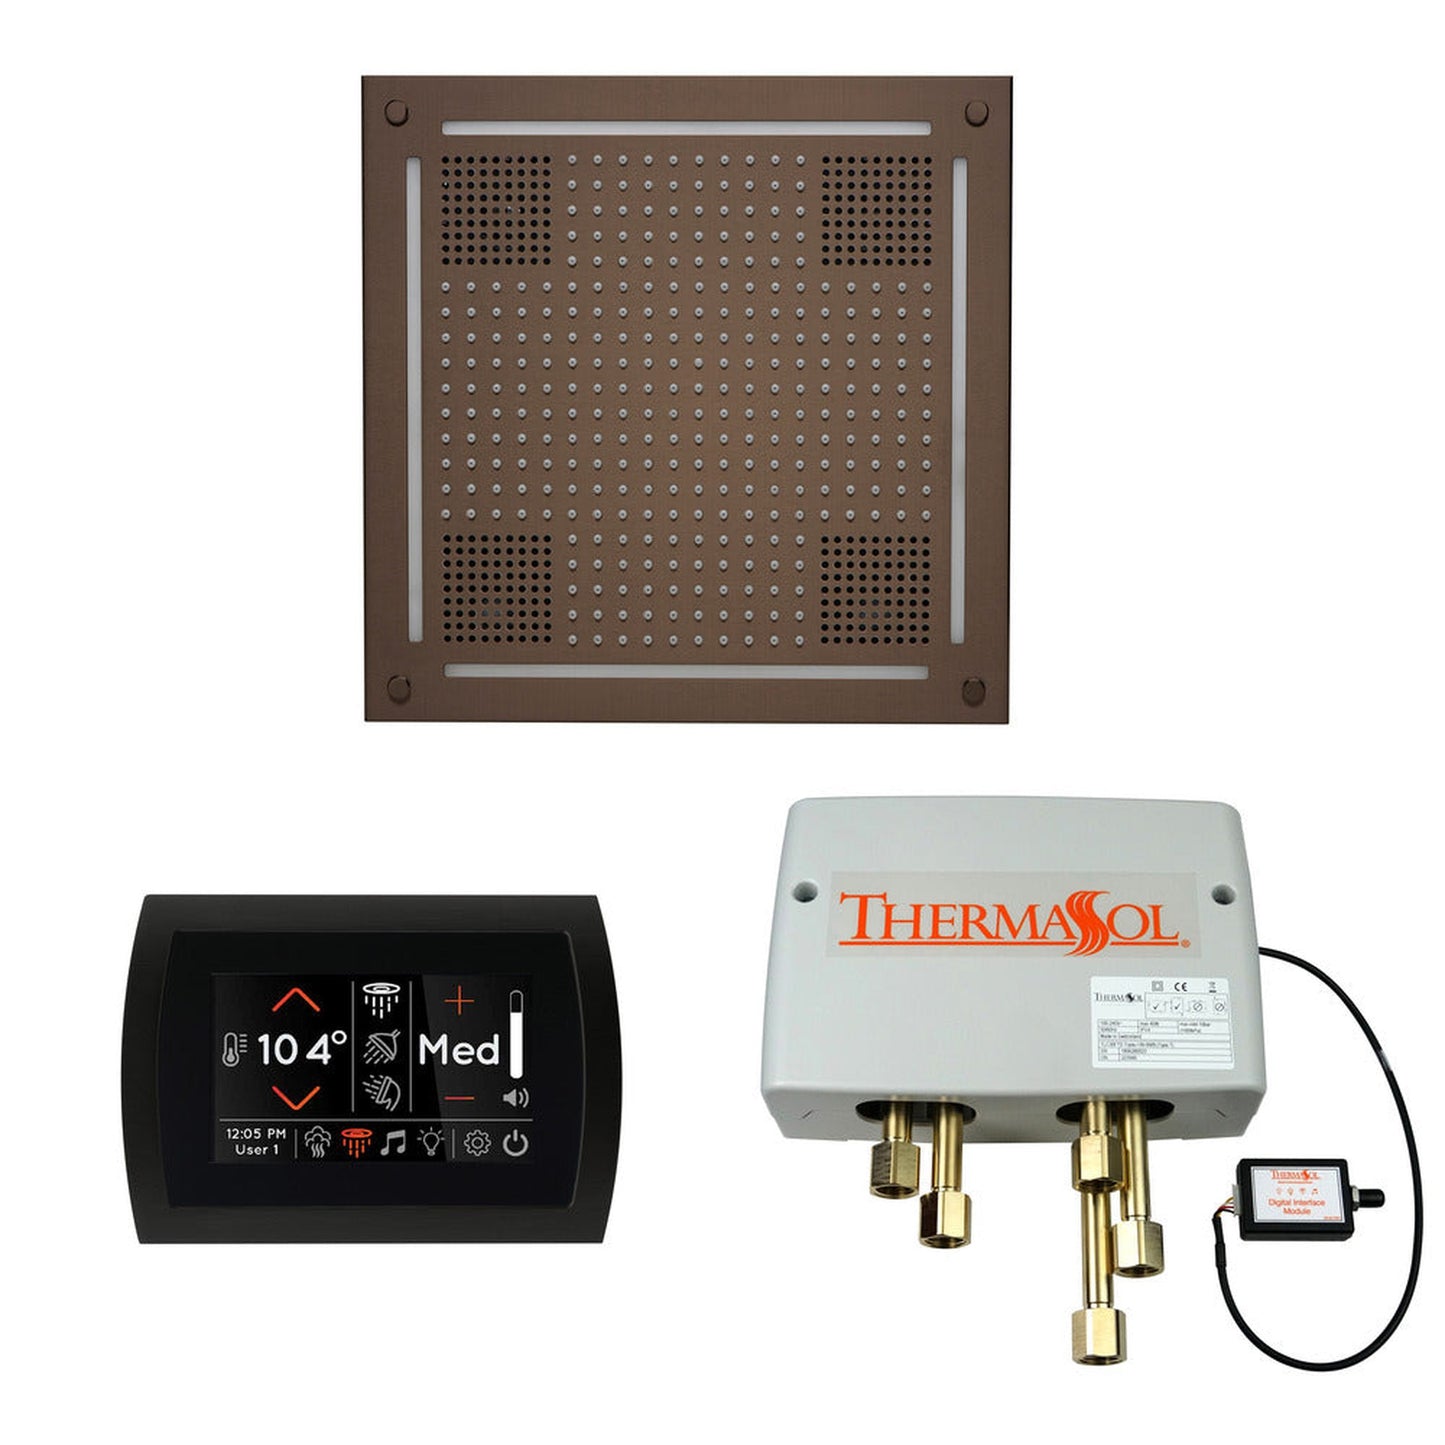 ThermaSol The Wellness Oil Rubbed Bronze Finish Hydrovive Shower Package with 5" Flushmount SignaTouch